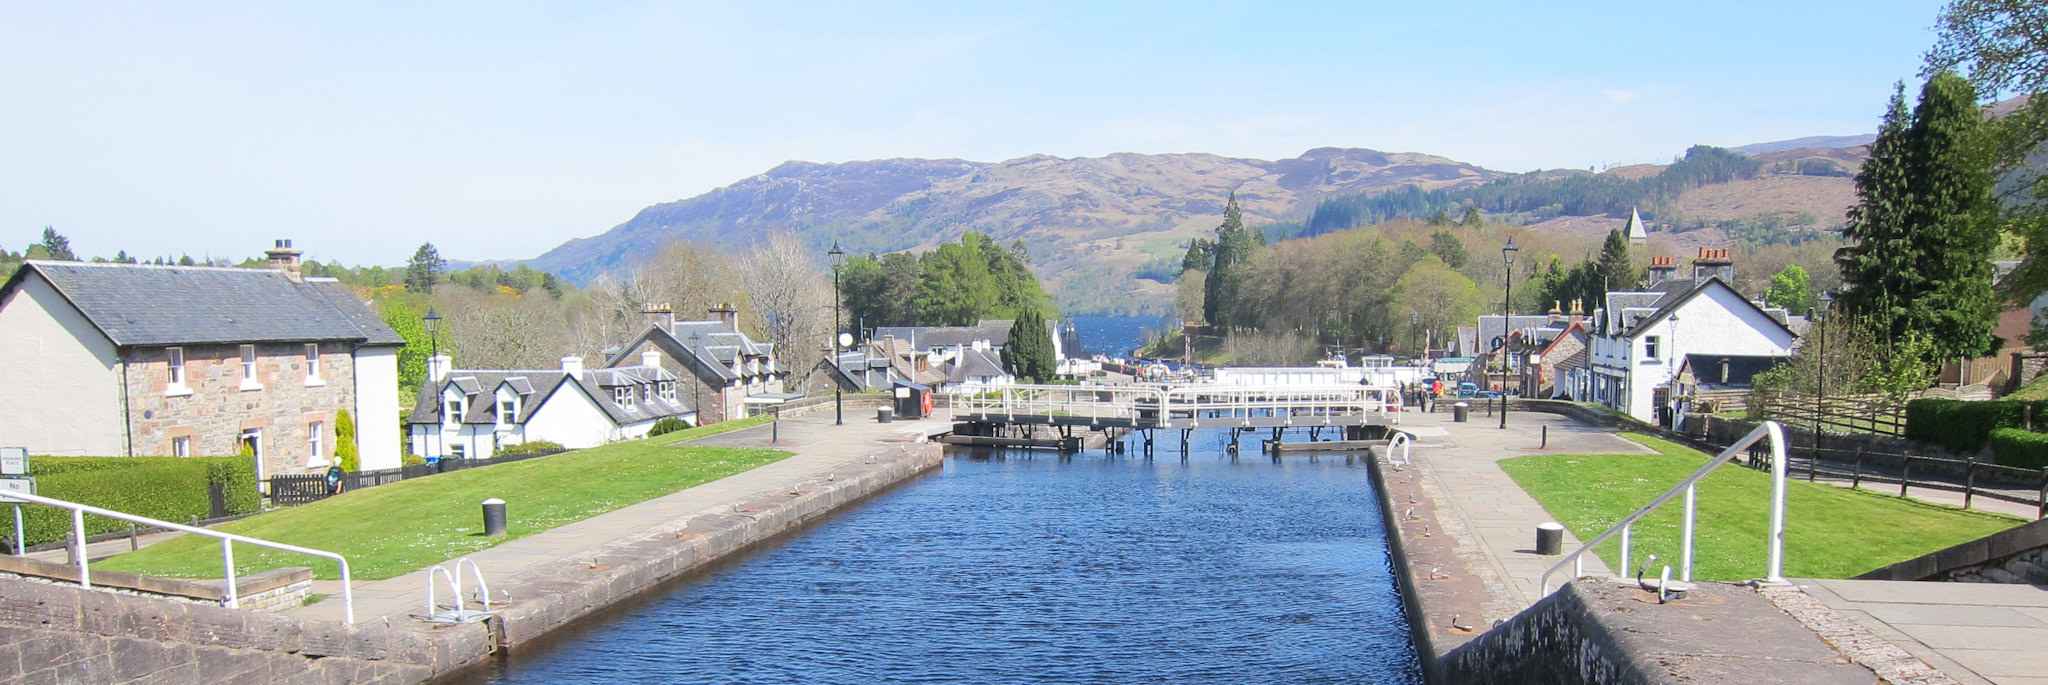 Caledonian Canal at Fort Augustus, Loch Ness